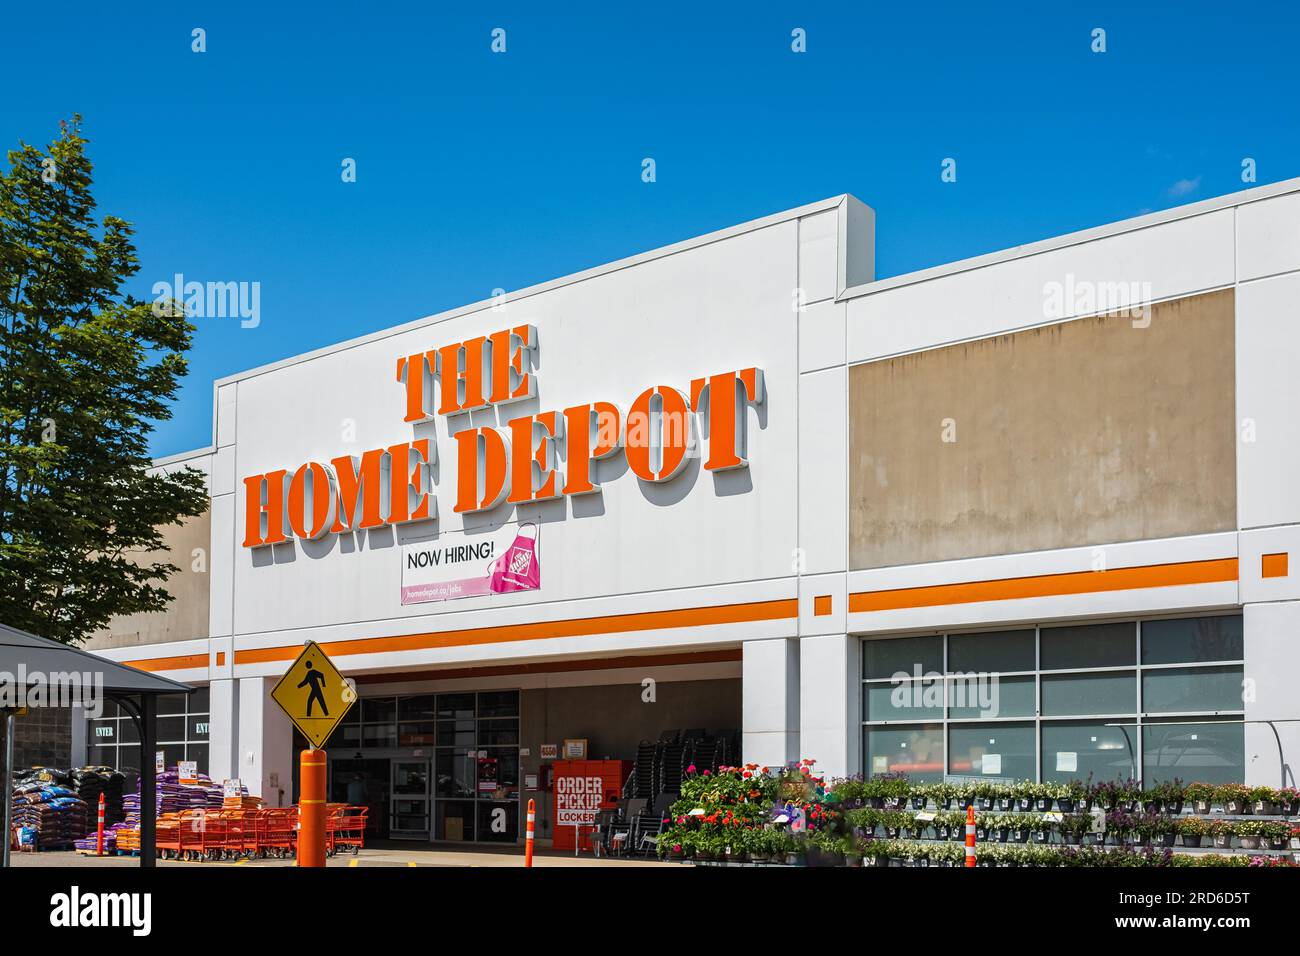 Home Depot storefront Location in Surrey BC Canada. Home Depot is the Largest Home Improvement Retailer and construction products and services in the Stock Photo